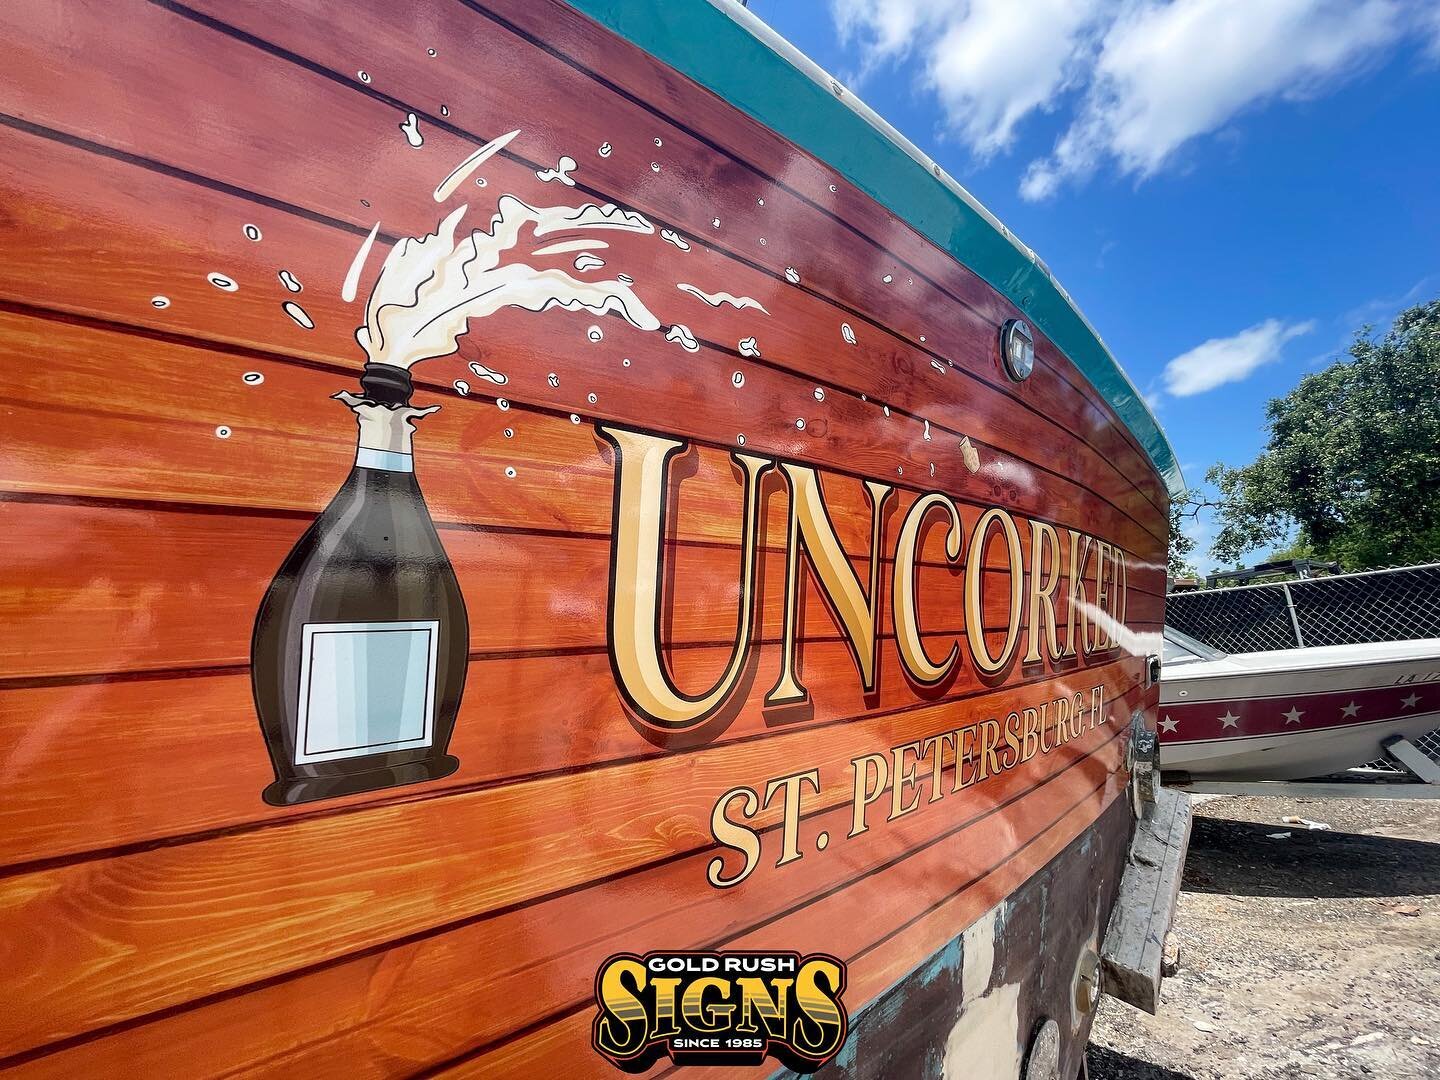 Uncorked! We love this name. This transom wrap turned out ✨amazing✨